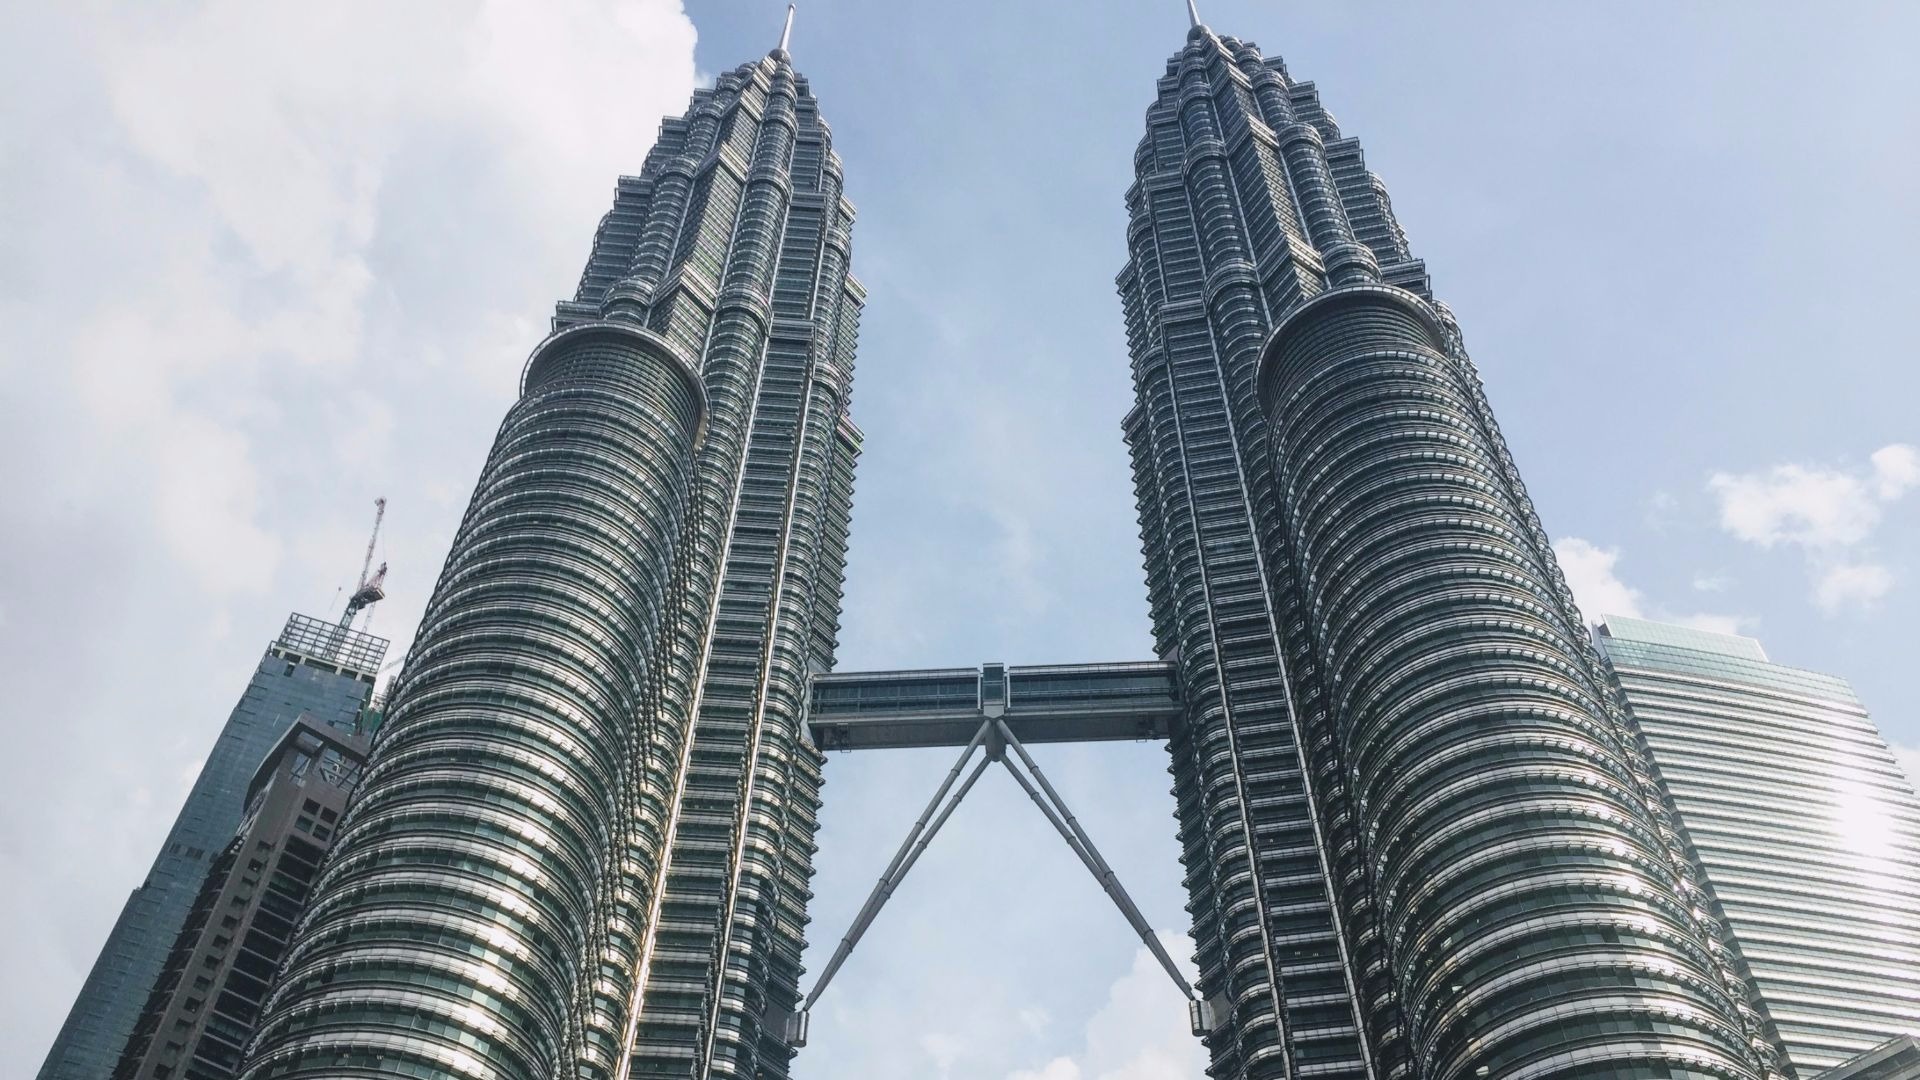 5 Days in Kuala Lumpur: What to Do, See & Eat